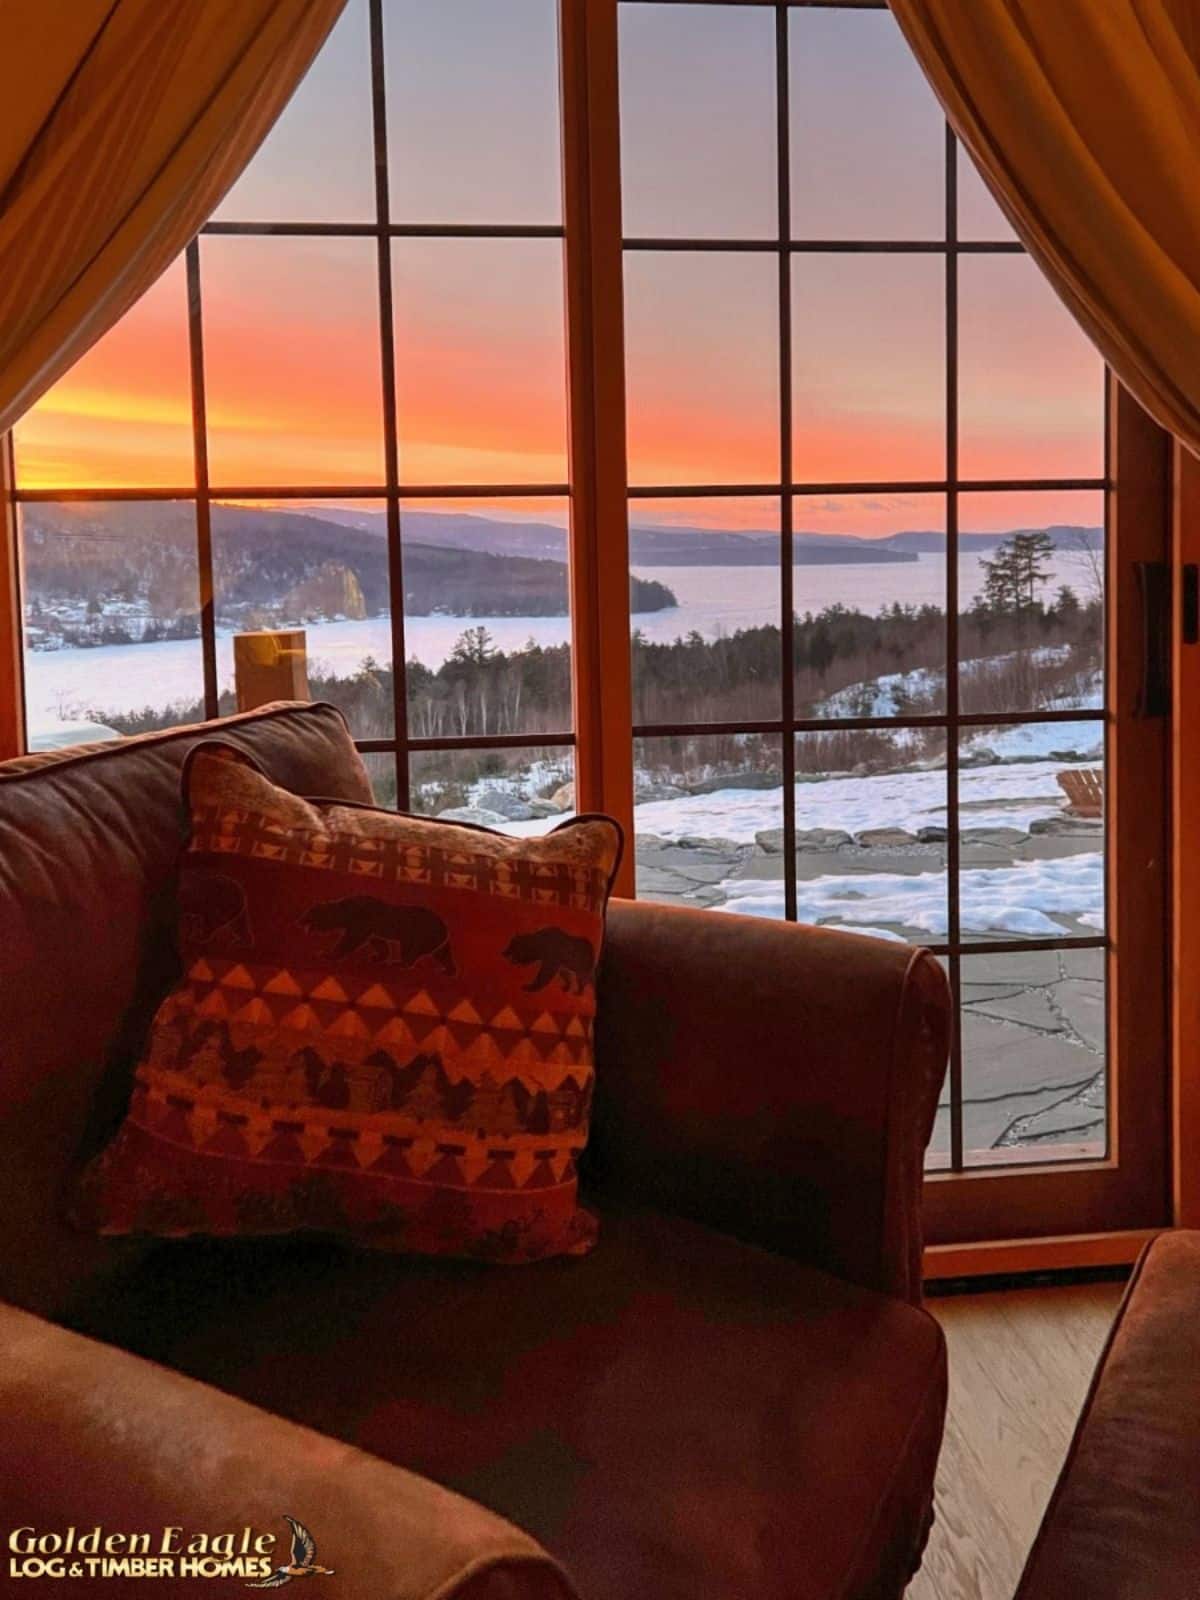 sunset view over snow out picture window by brown chair